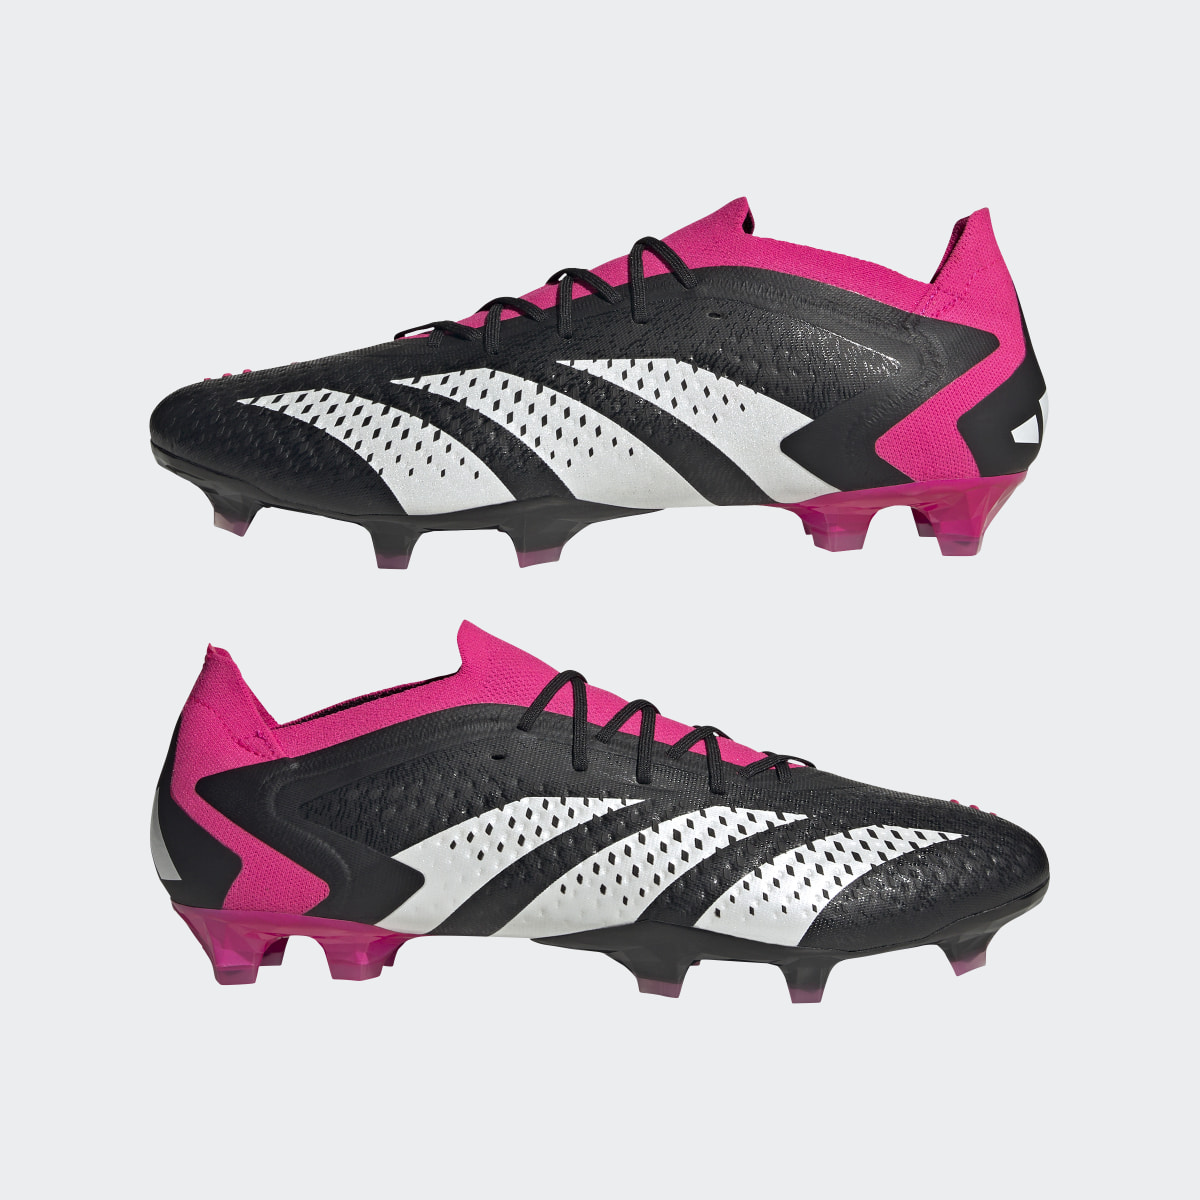 Adidas Predator Accuracy.1 Low Firm Ground Boots. 12